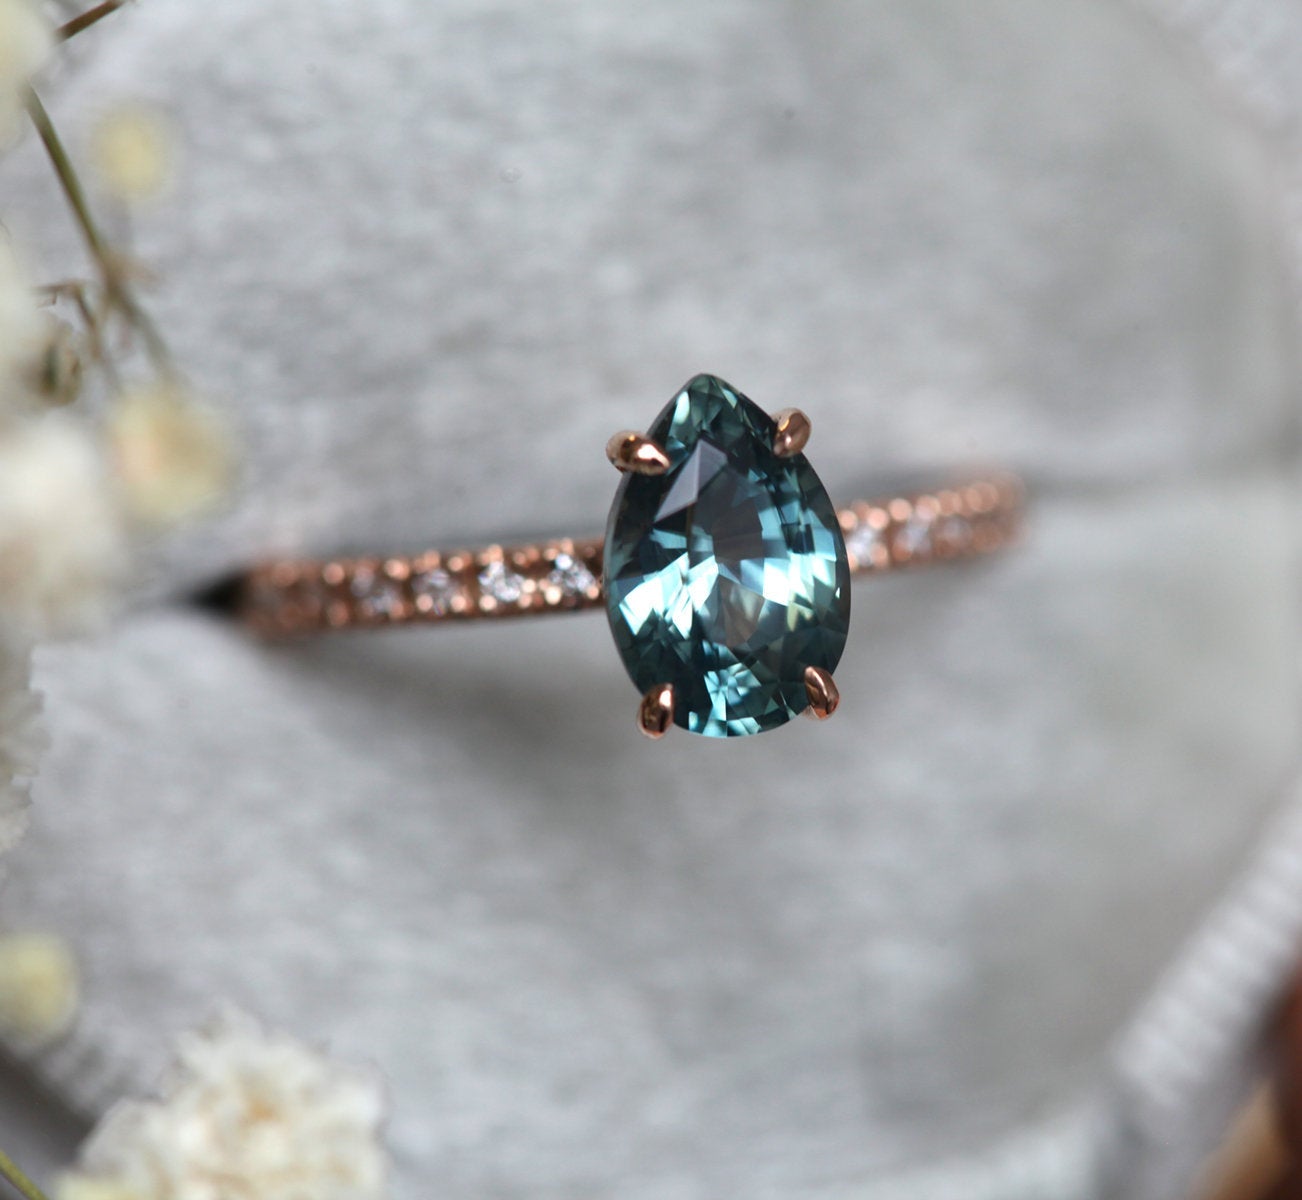 Pear-shaped teal sapphire ring with white side diamonds